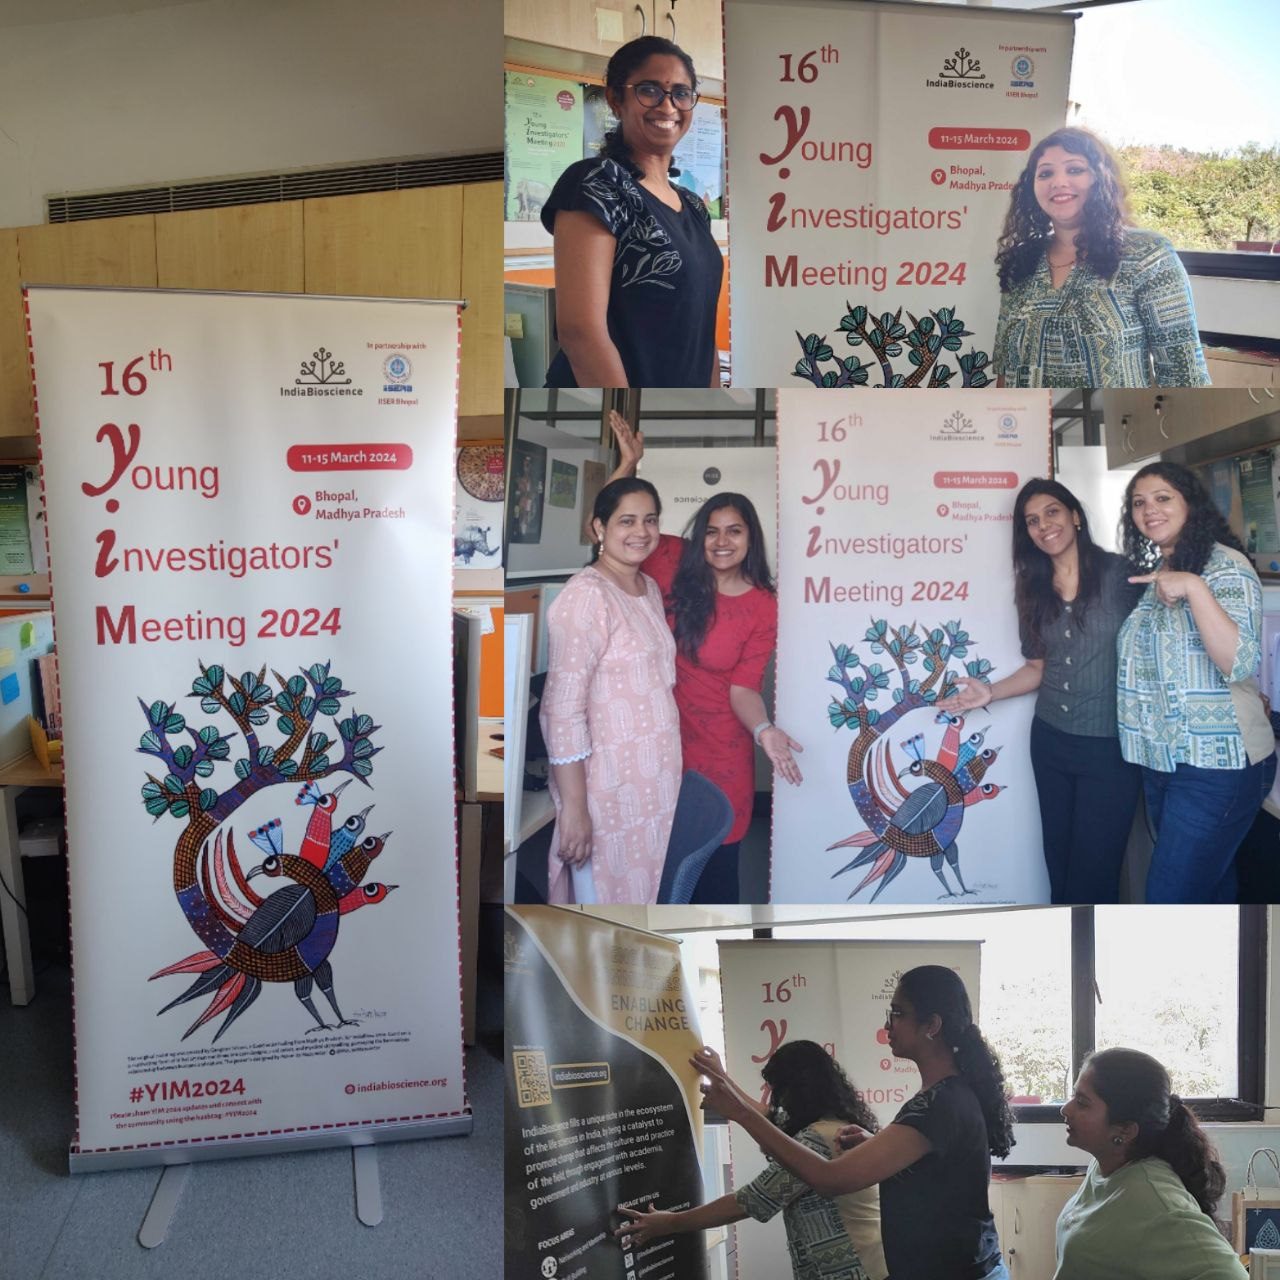 Behind the scenes of YIM 2024 at IndiaBioscience office. Credits: Collage by Ankita Rathore